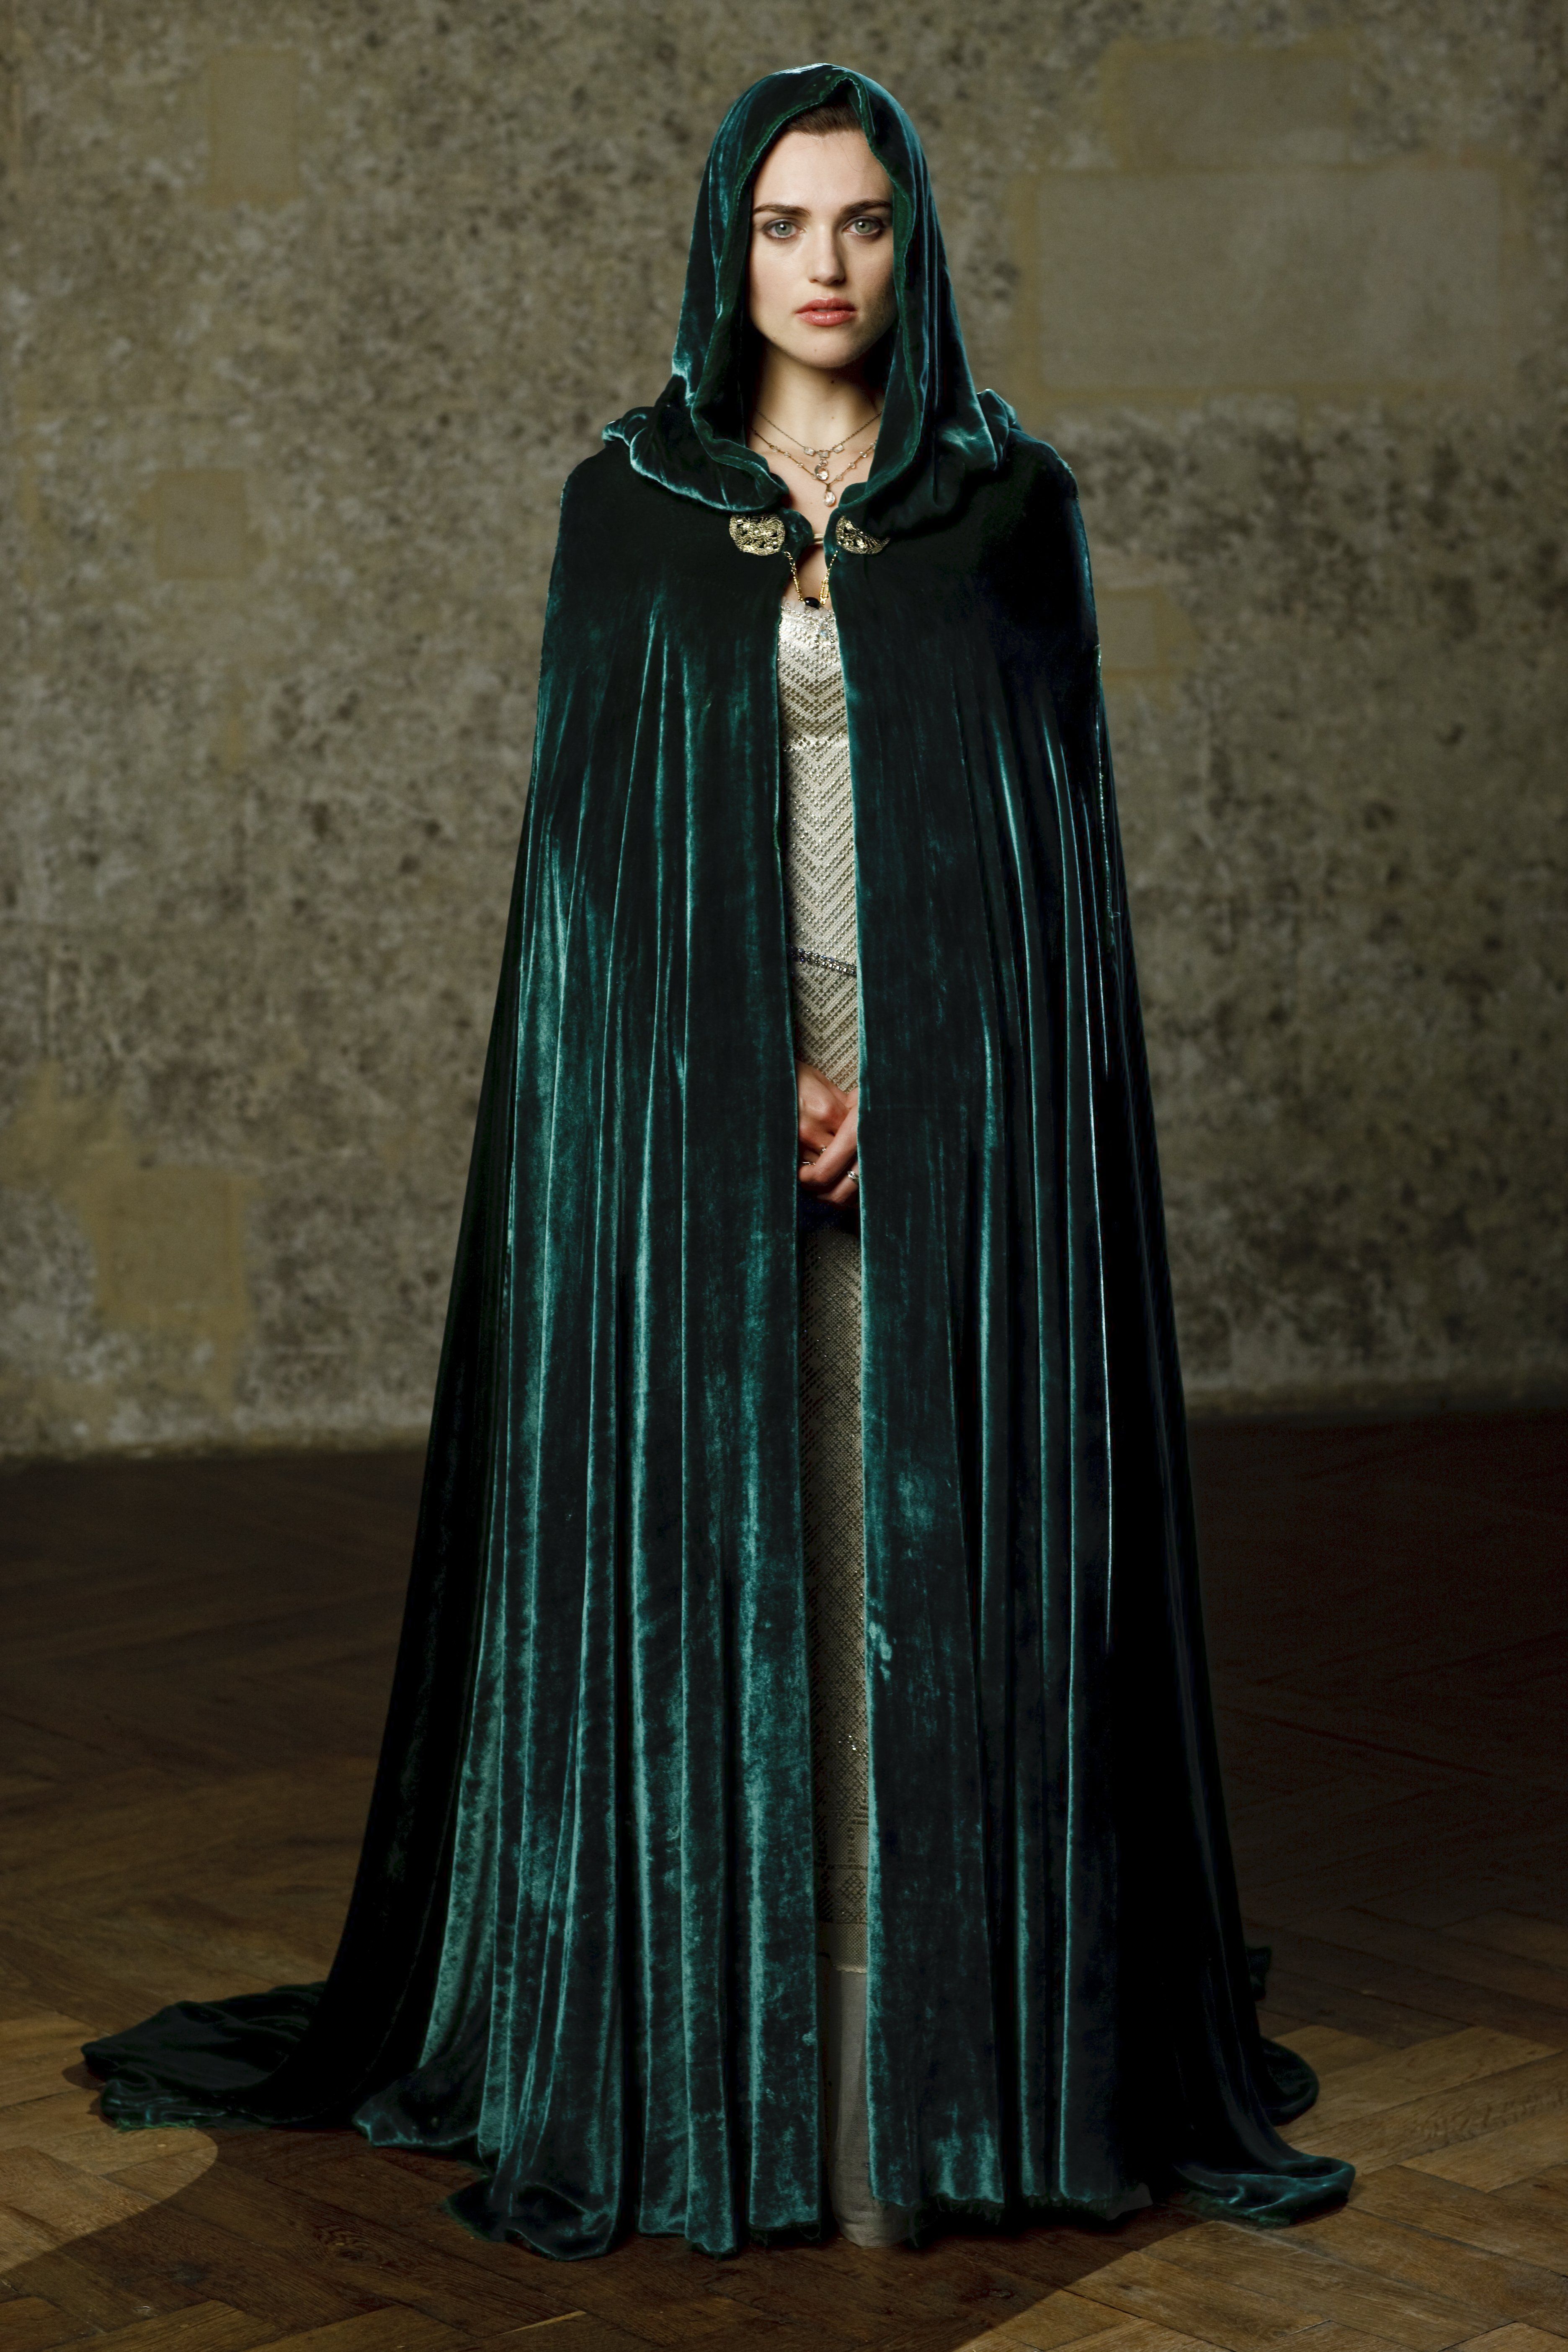 Merlin - Google Search | Merlin | Pinterest | Cloaks and Cosplay